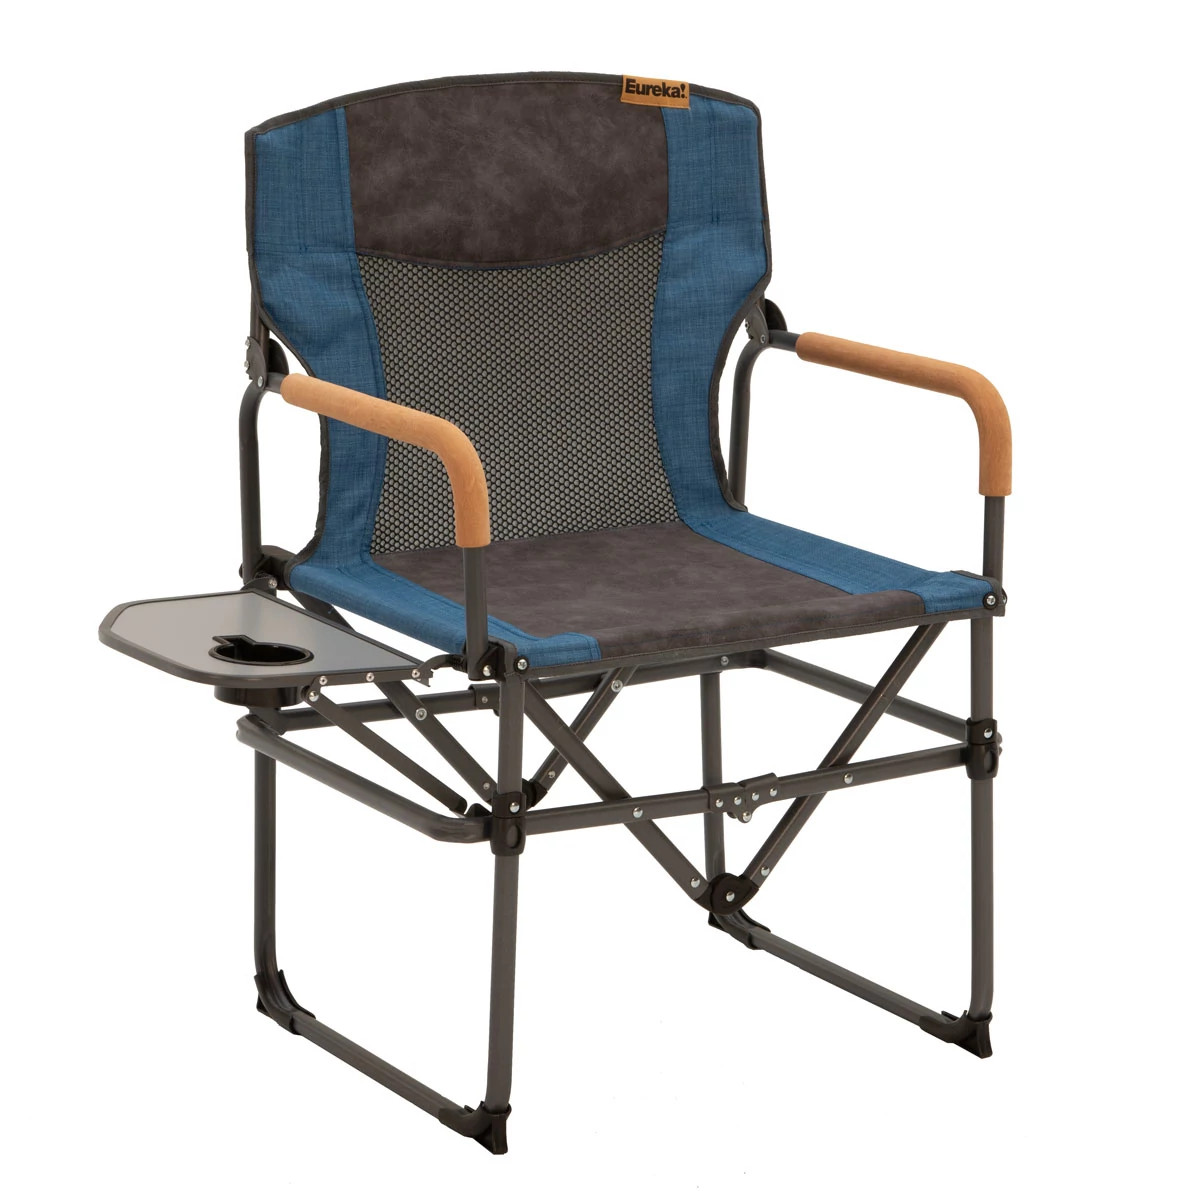 Black Portal Outdoor Portable Folding Camping Directors Chair with Side Table 